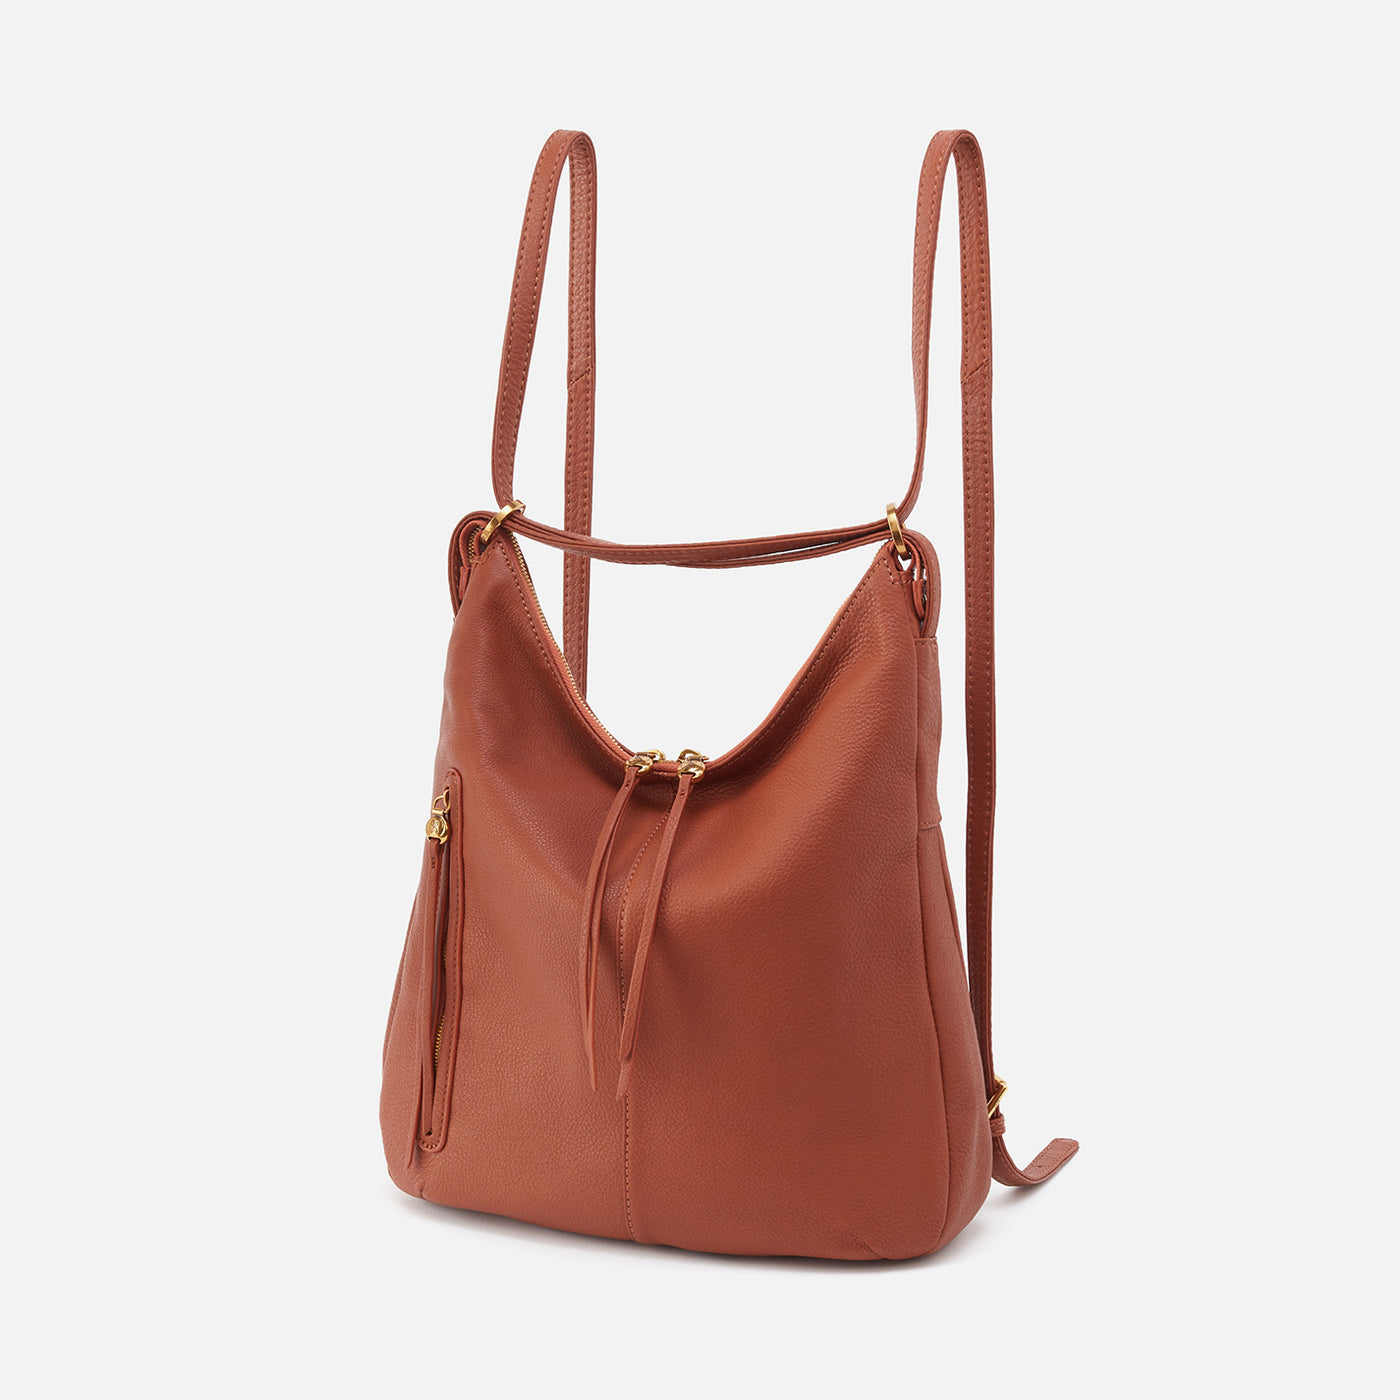 Cognac Brown Leather Convertible Backpack Shoulder Bag - The